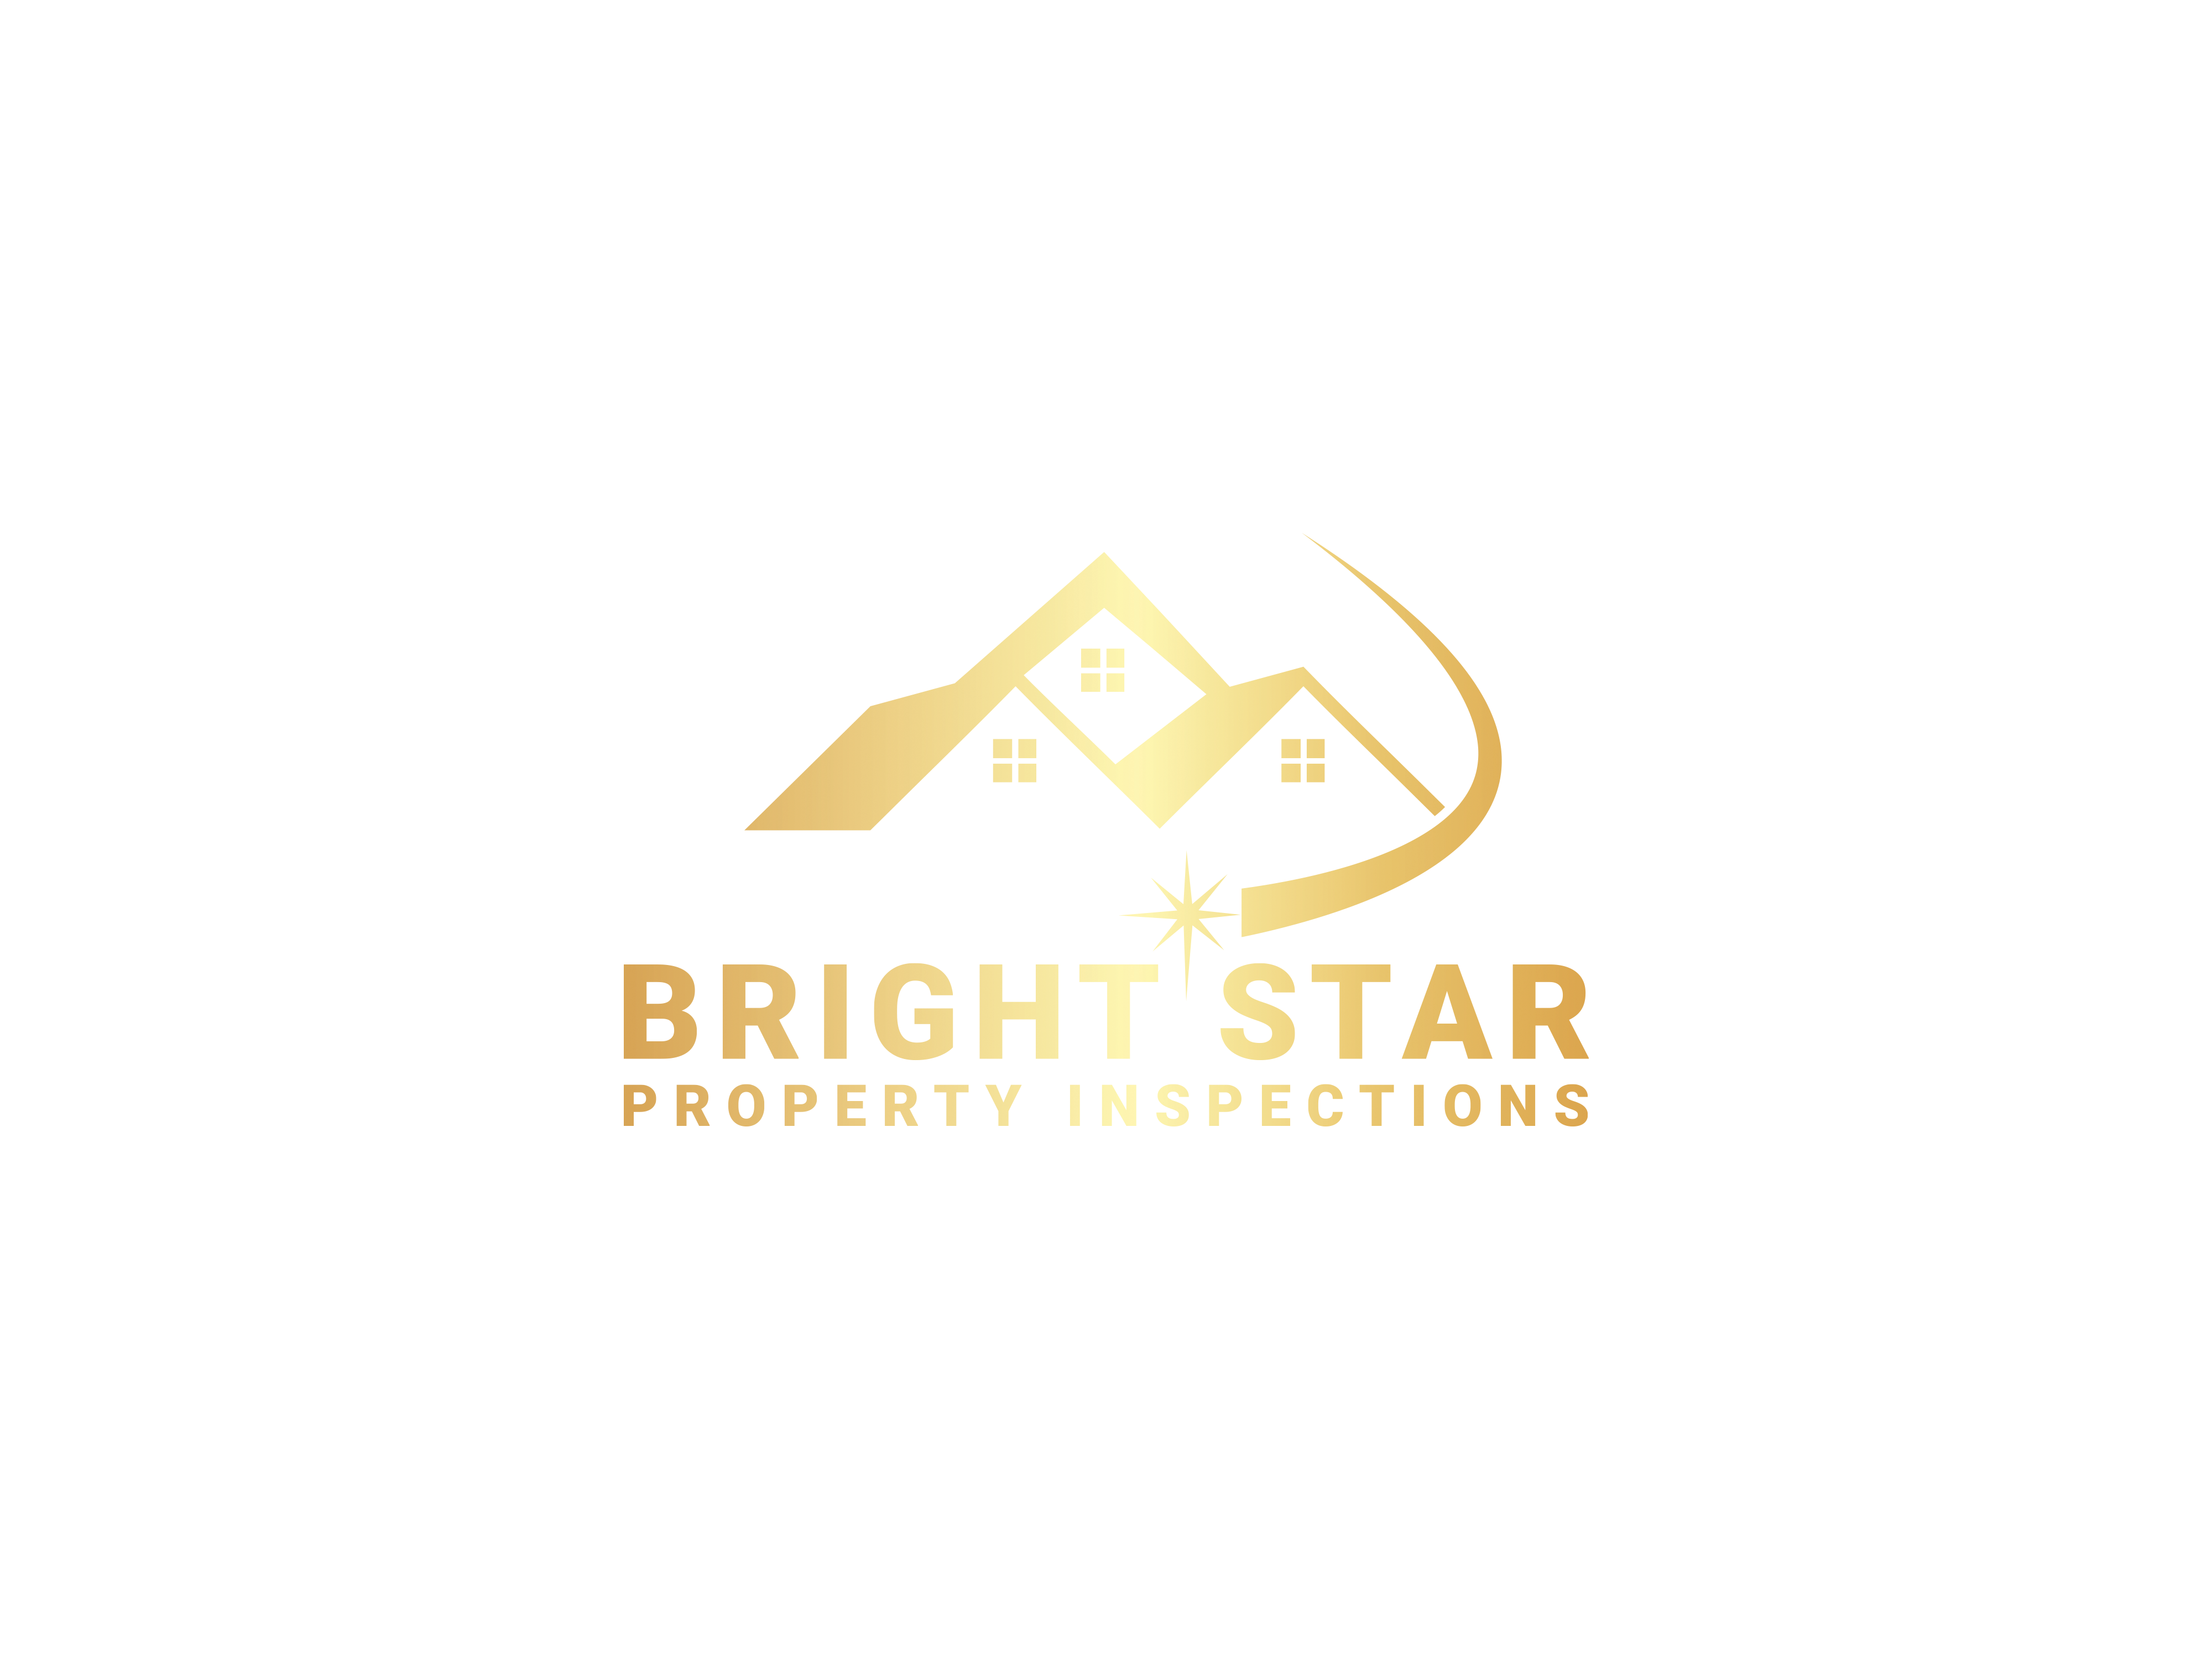 Bright Star Property Inspections Logo